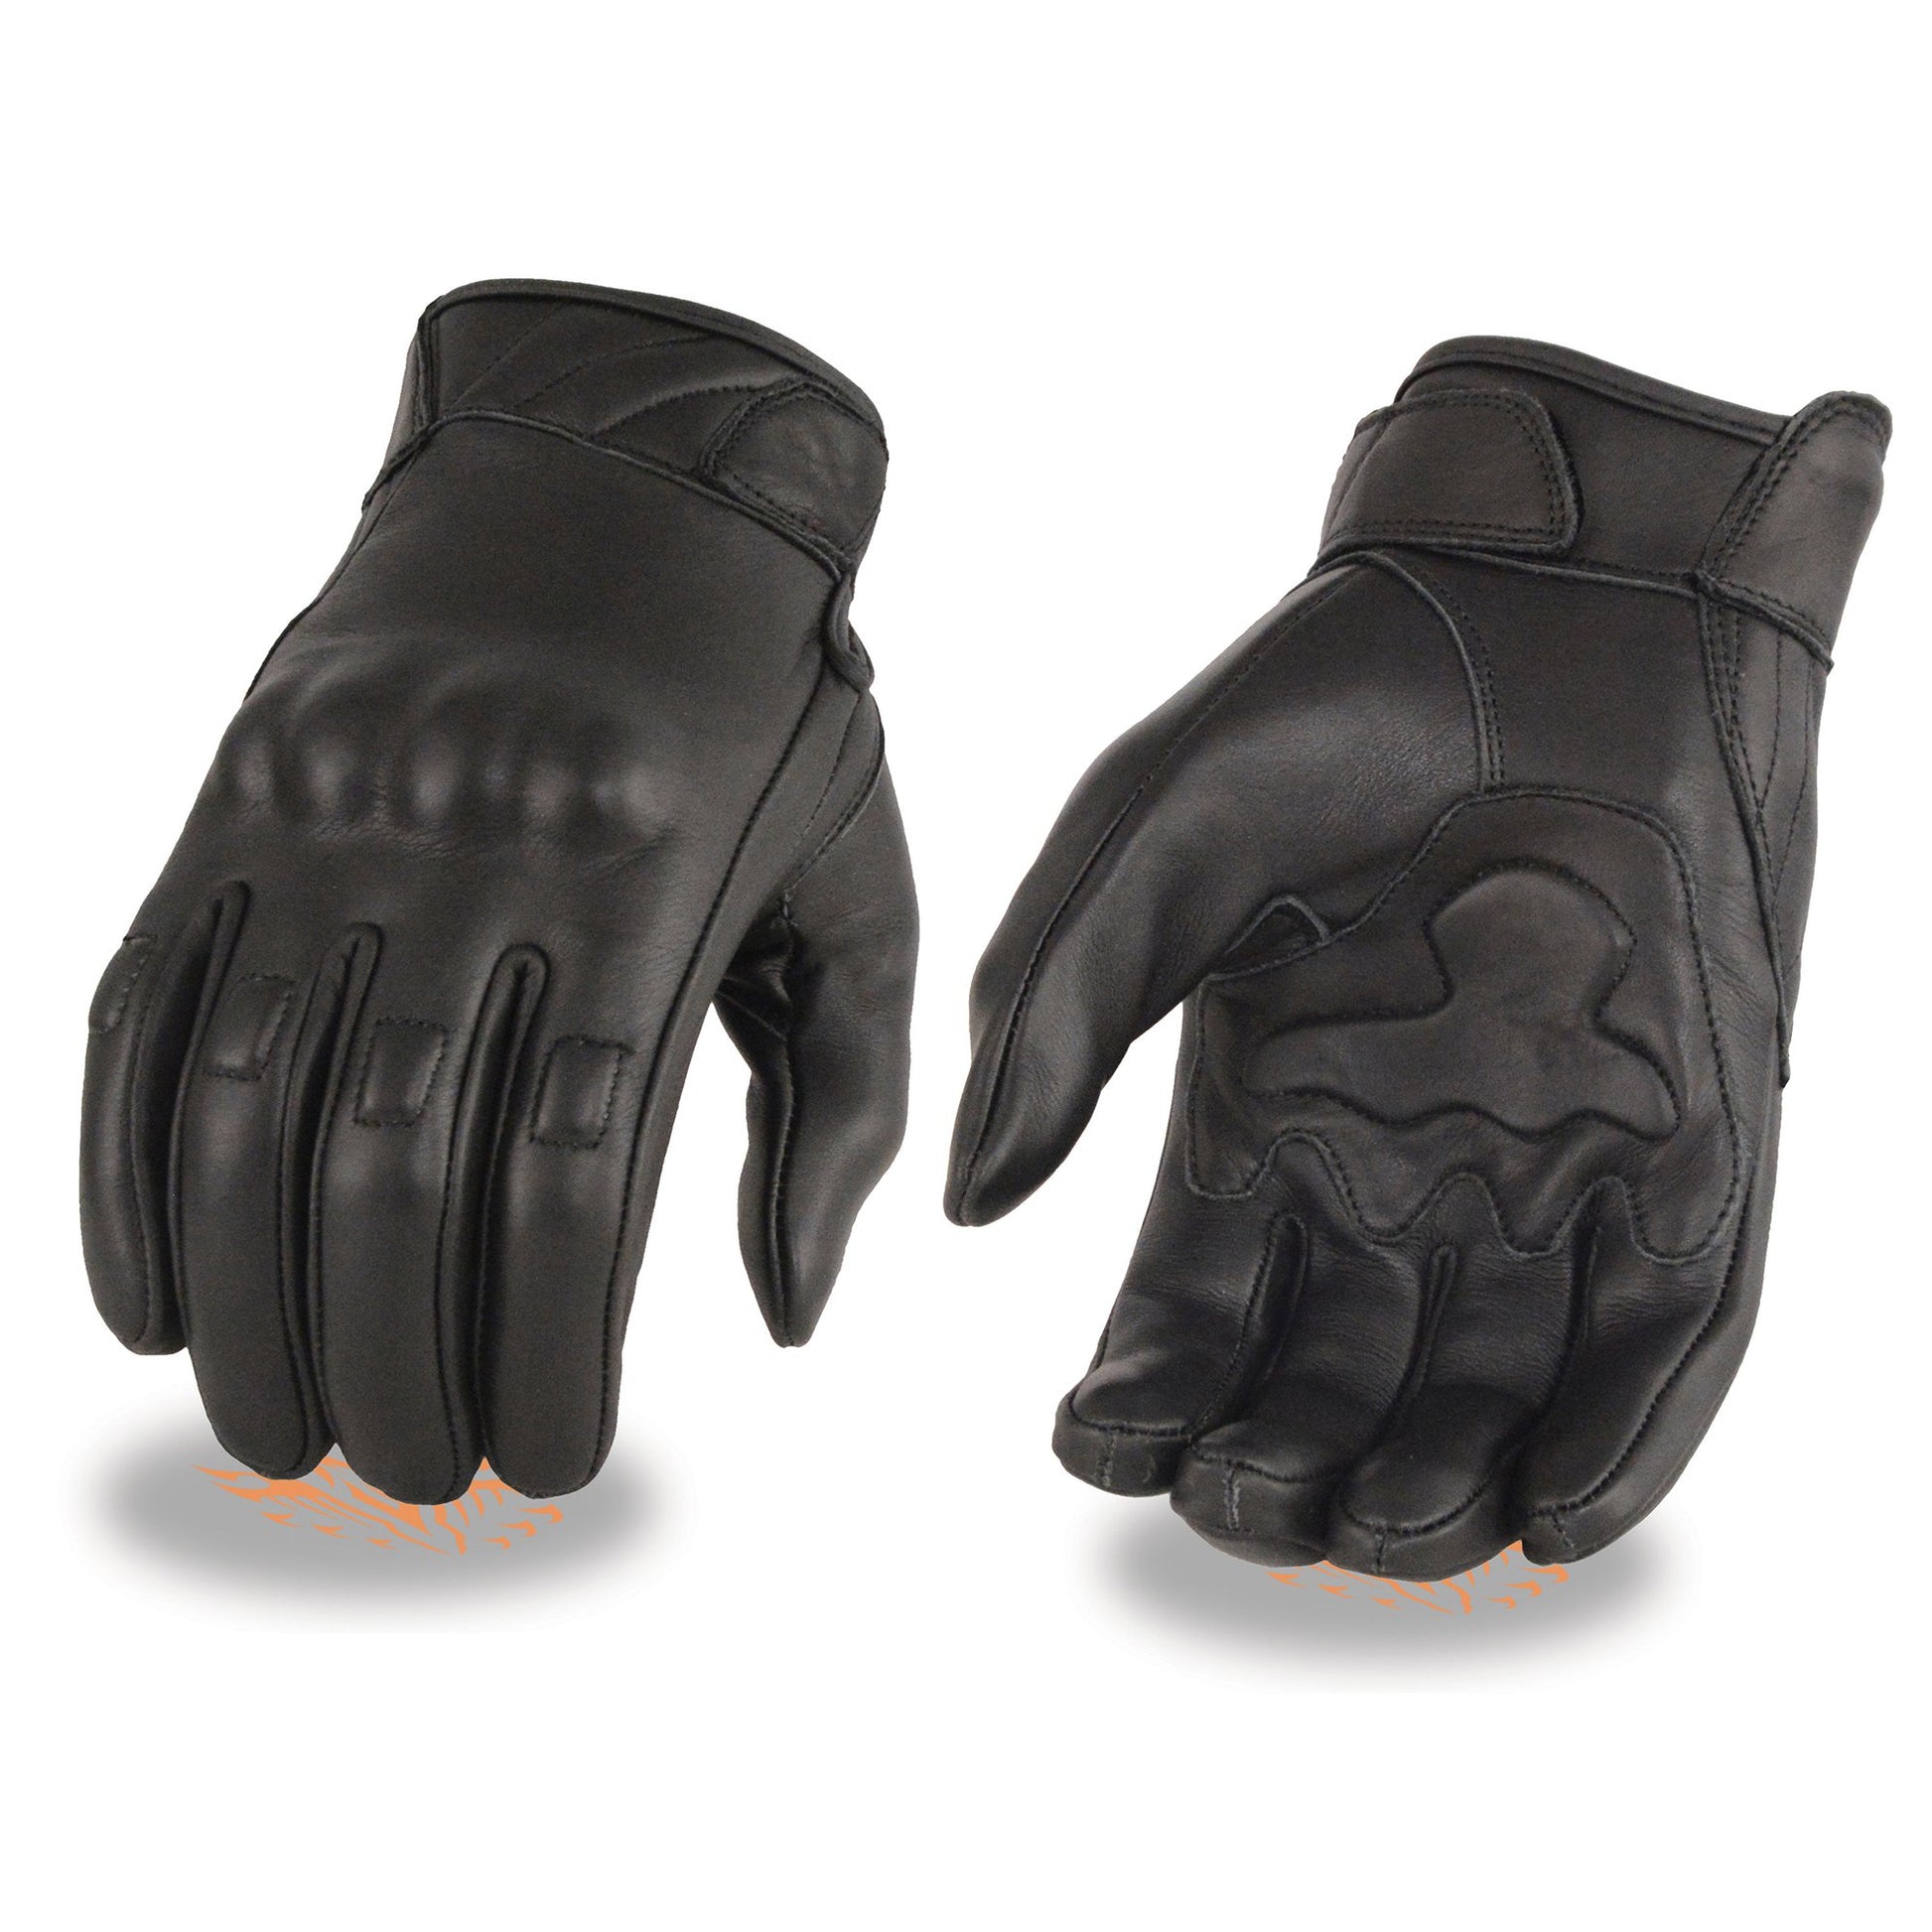 Xelement XG7501 Men's Black Leather Gloves with Rubberized Knuckles